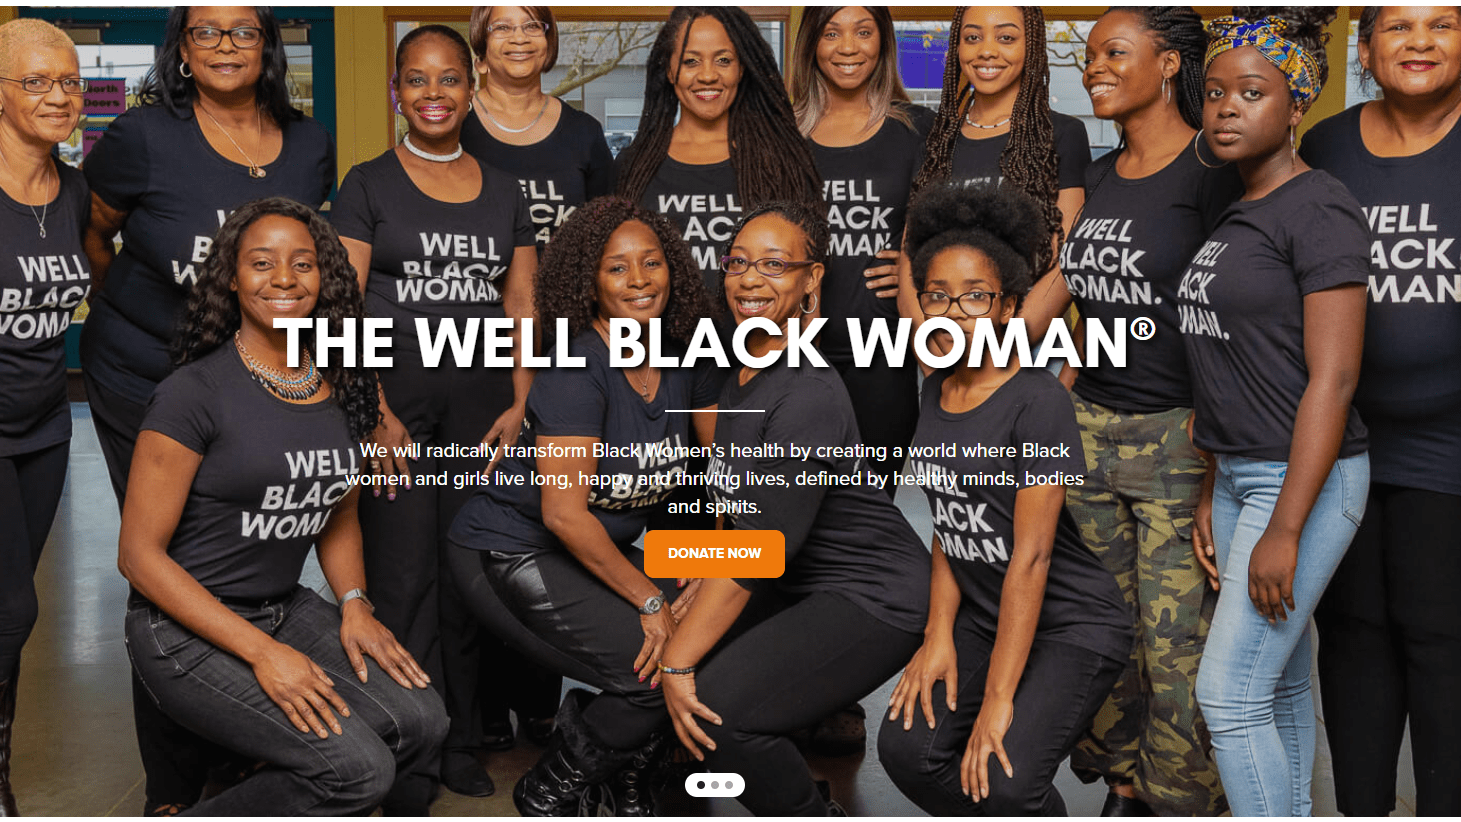 Check out these awesome women-led orgs that are making a real difference in their communities